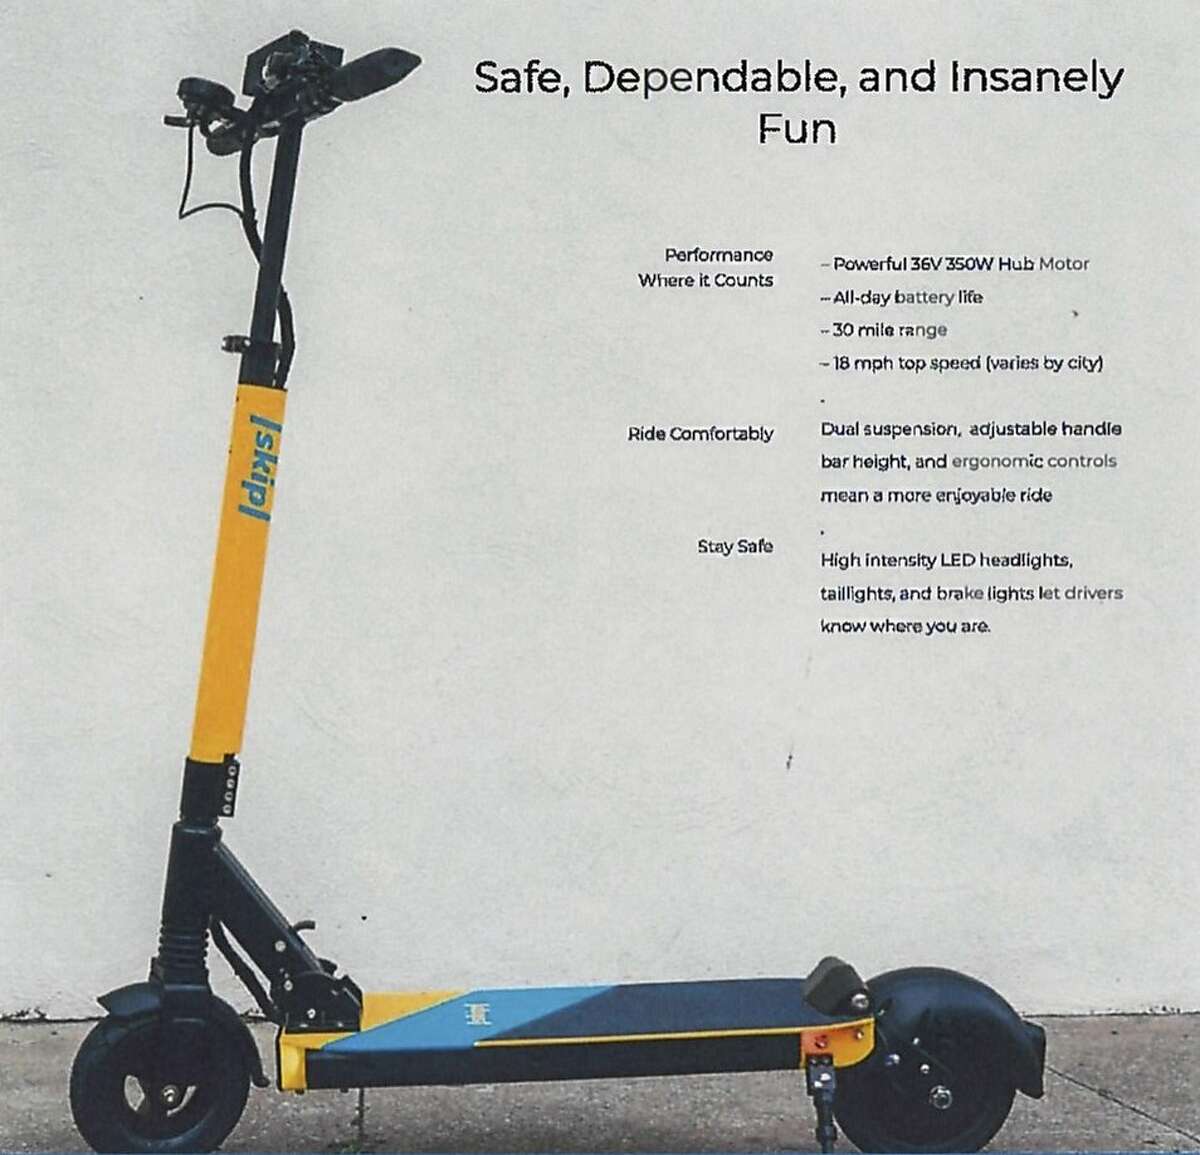 Skip of San Francisco, formerly known as Waybots, submitted an application in June 2018 to the San Francisco Municipal Transportation Agency to deploy stand-up scooters. Here's what one looks like.